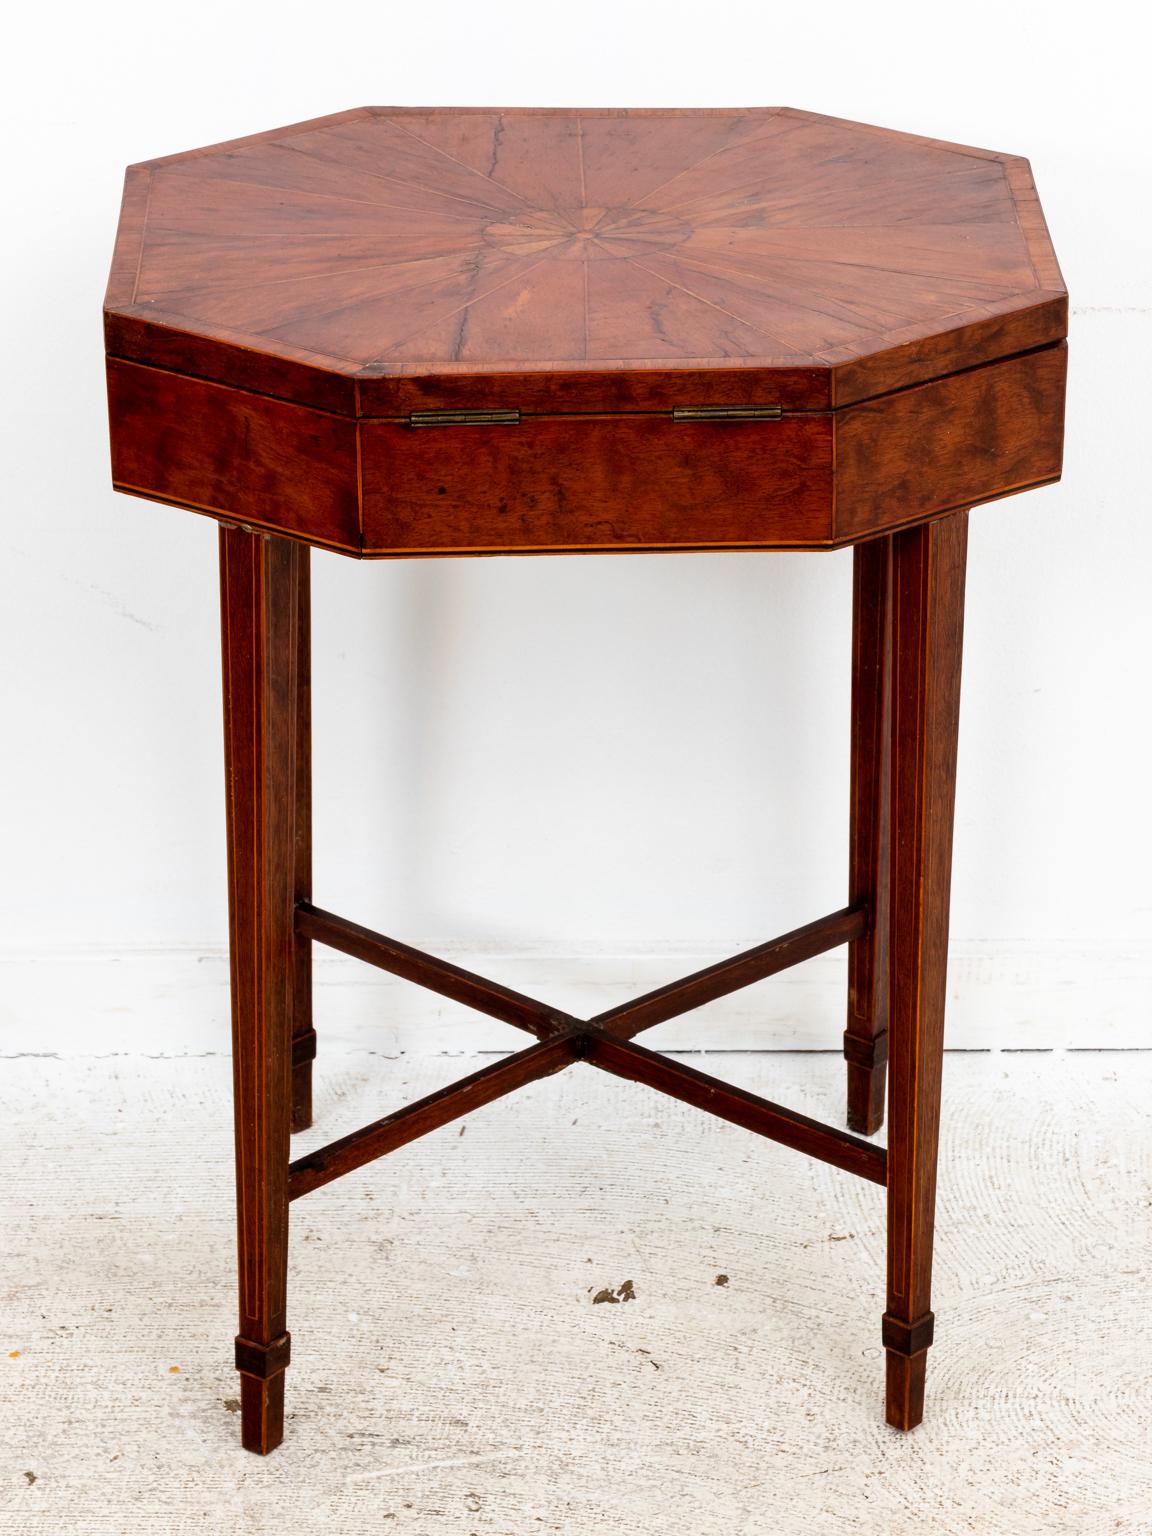 Circa 1790-1820s box top side table in Mahogany with Satinwood and Rosewood inlay in the style of Thomas Hepplewhite. The tabletop features a radiating inlay top with central medallion. The base is supported by an x-shaped cross stretcher and spade